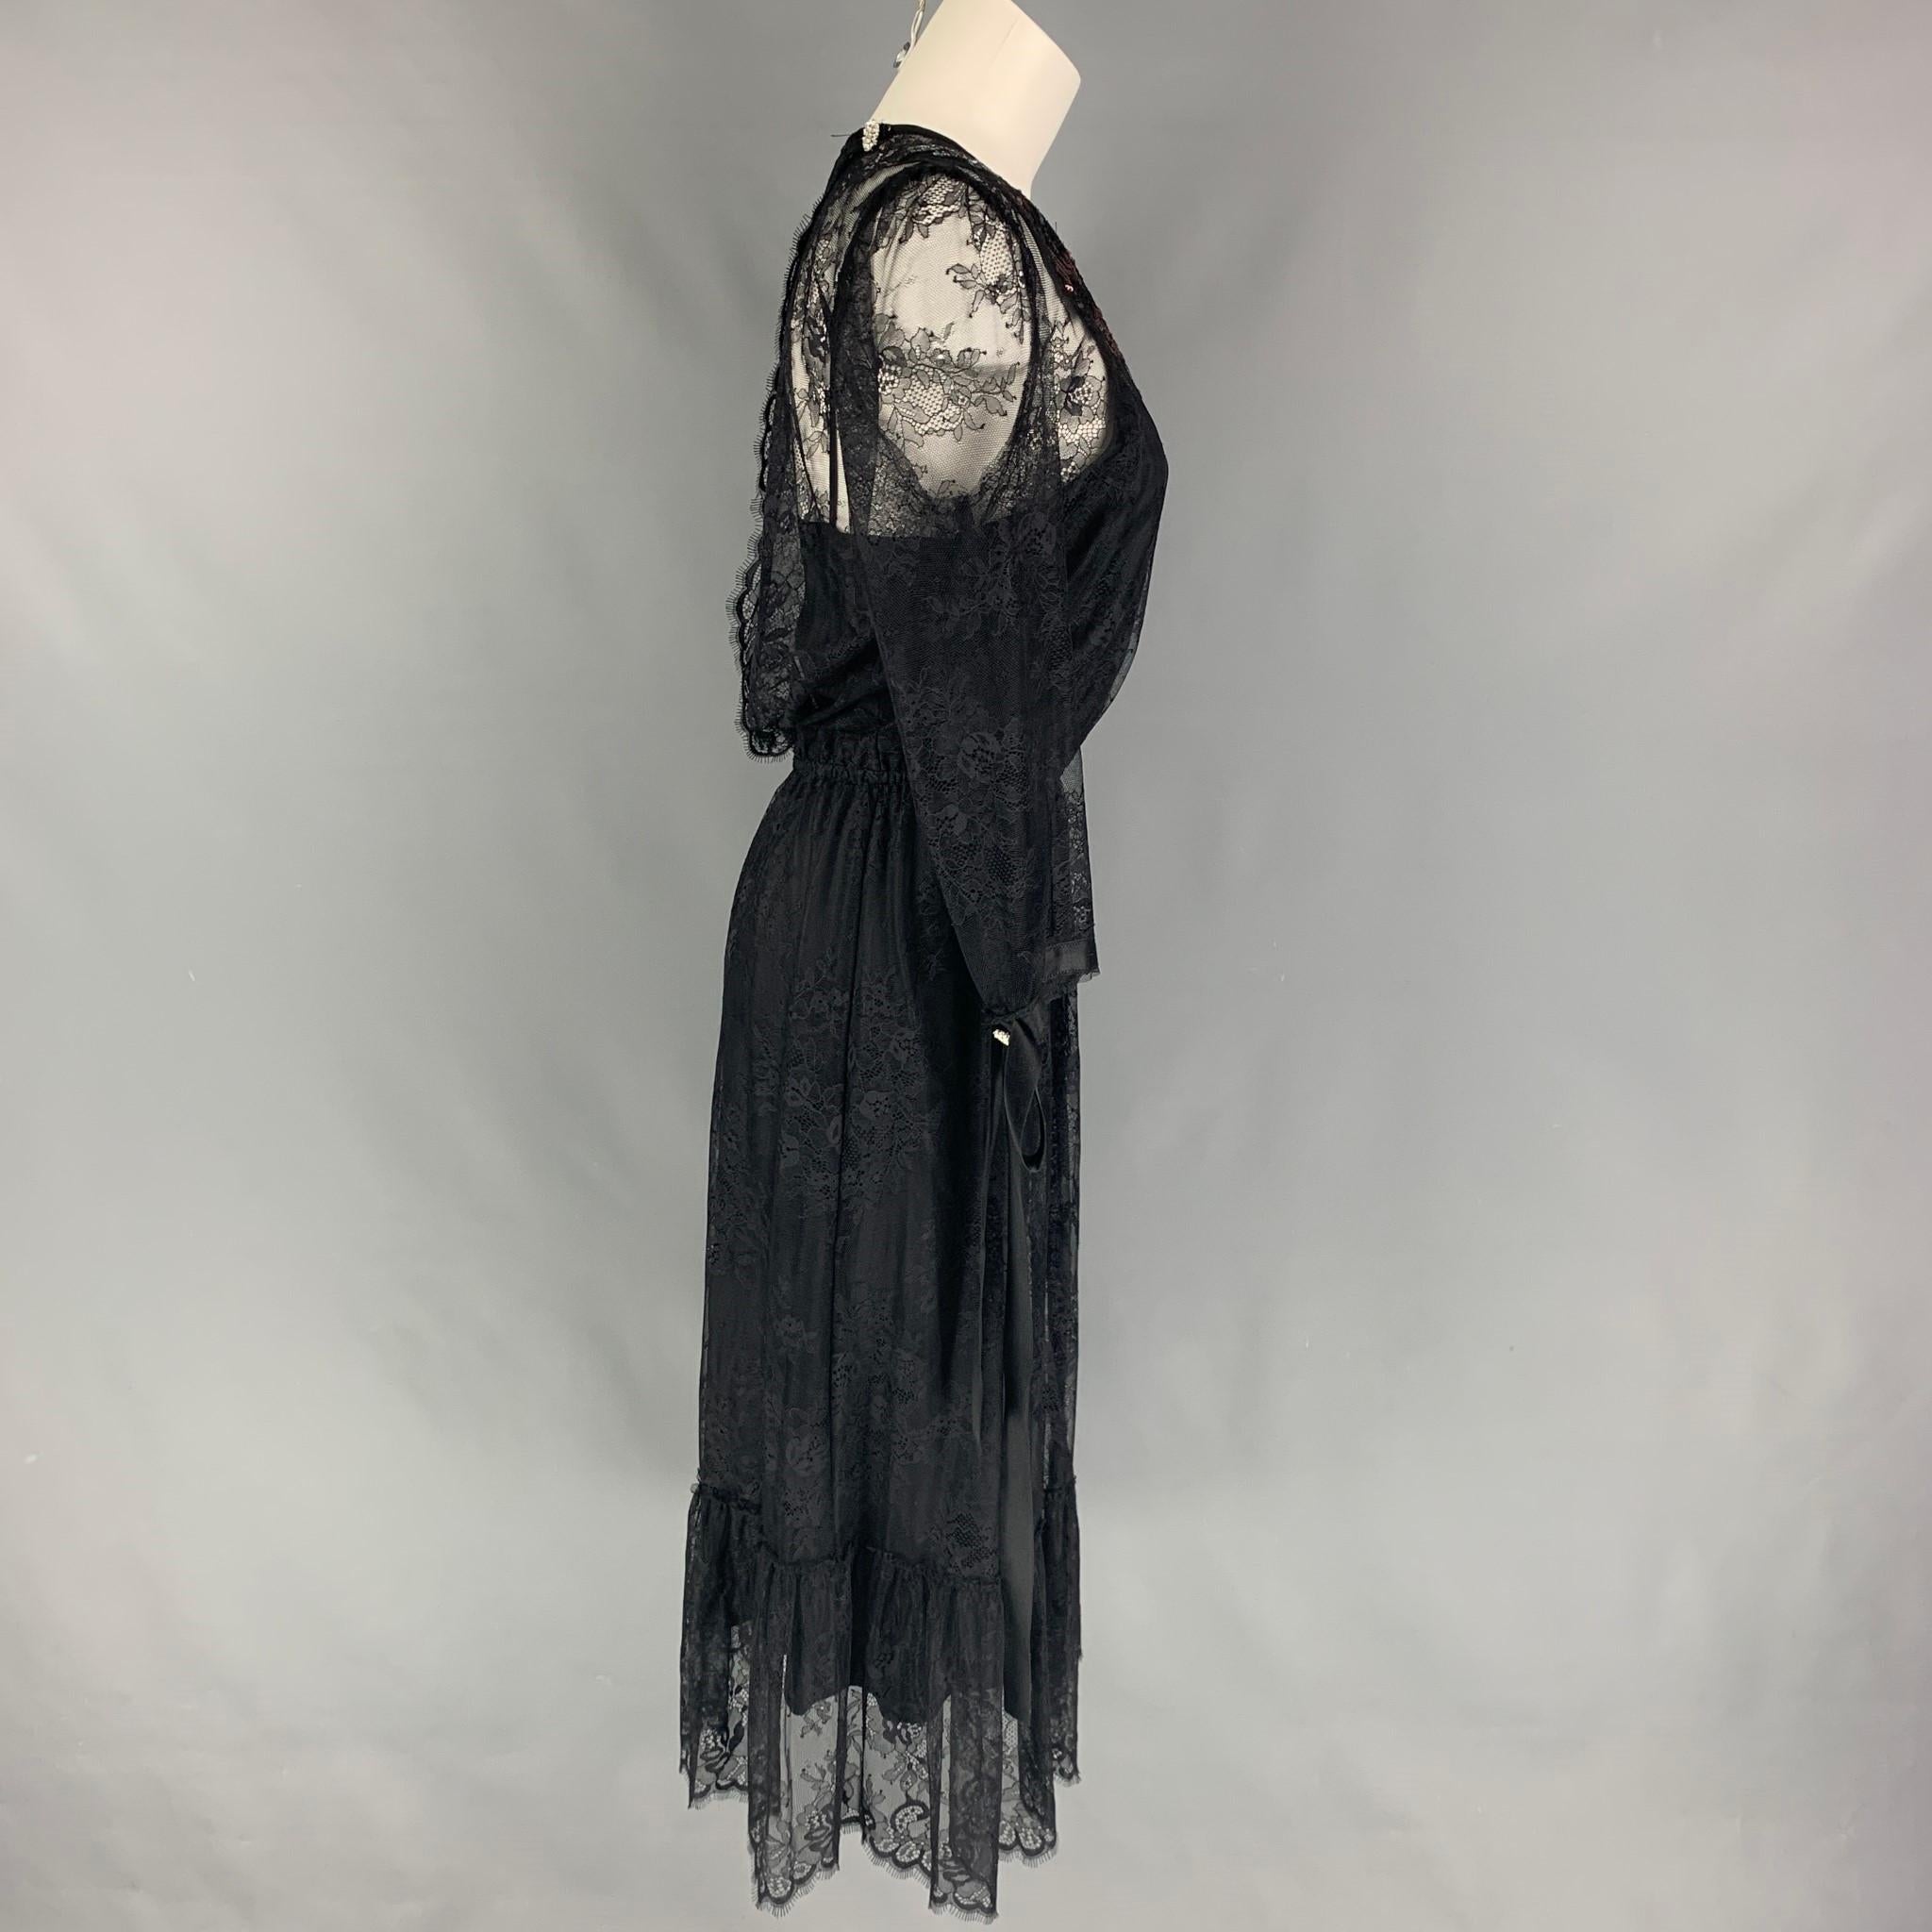 MARC JACOBS dress comes in a black lace nylon with a slip liner, ribbon sleeve details, floral sequin design, back rhinestone detail, and a elastic waistband. 

Very Good Pre-Owned Condition.
Marked: 4

Measurements:

Shoulder: 14 in.
Bust: 34